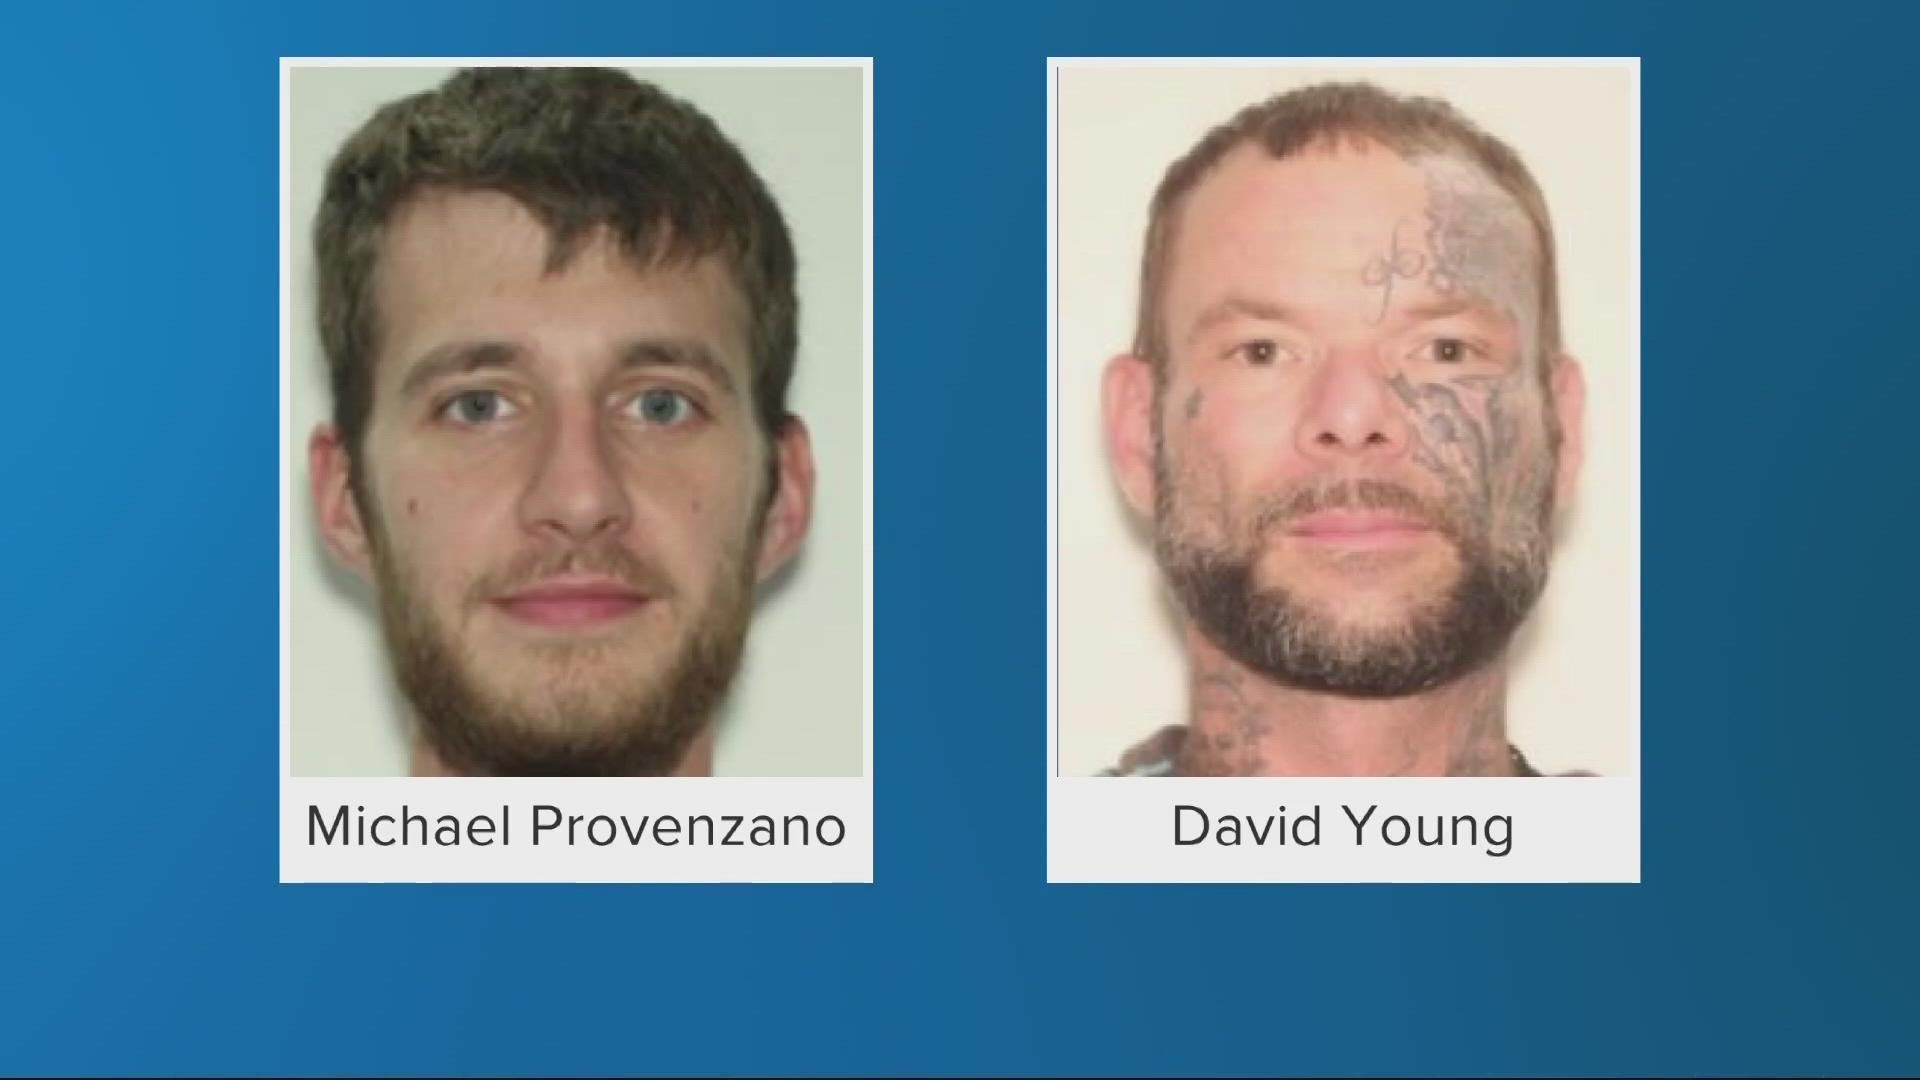 The two men are wanted on charges of drug trafficking conspiracy and are tied to the Ghost Face Gangsters criminal street gang, according to the FBI.